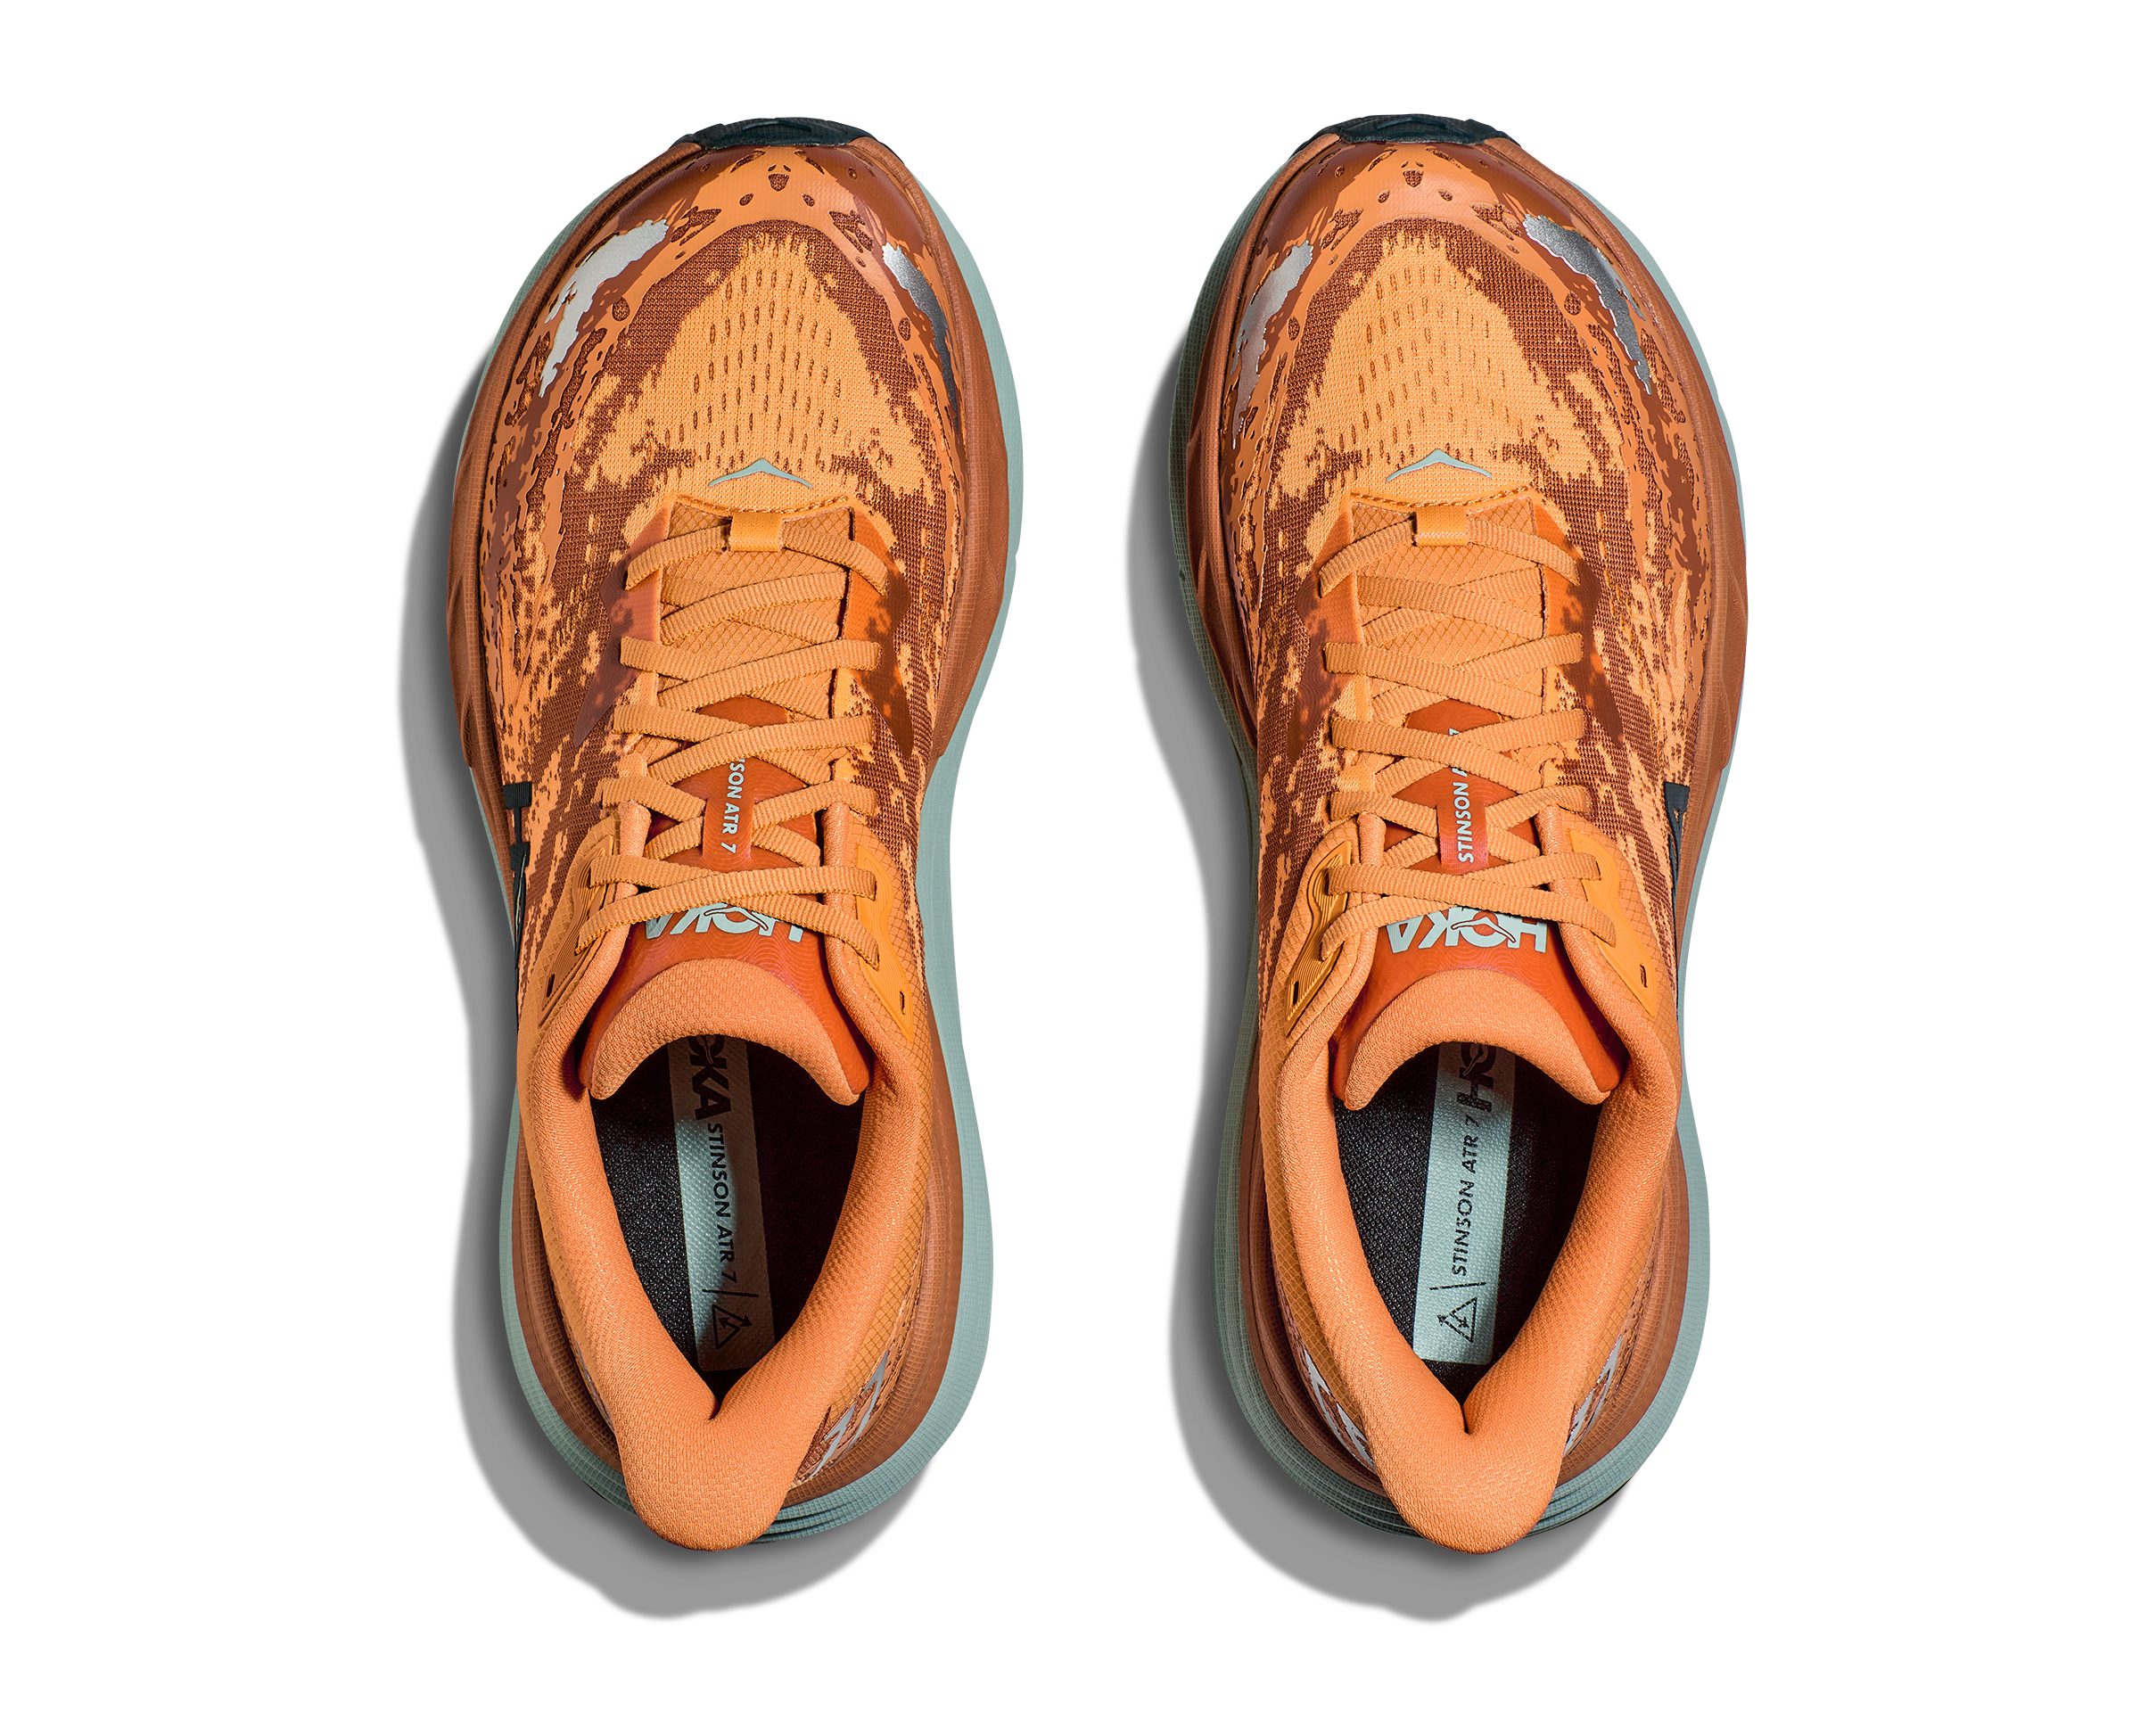 Top view of the Men's Stinson 7 in the color Amber Haze/Amber Brown